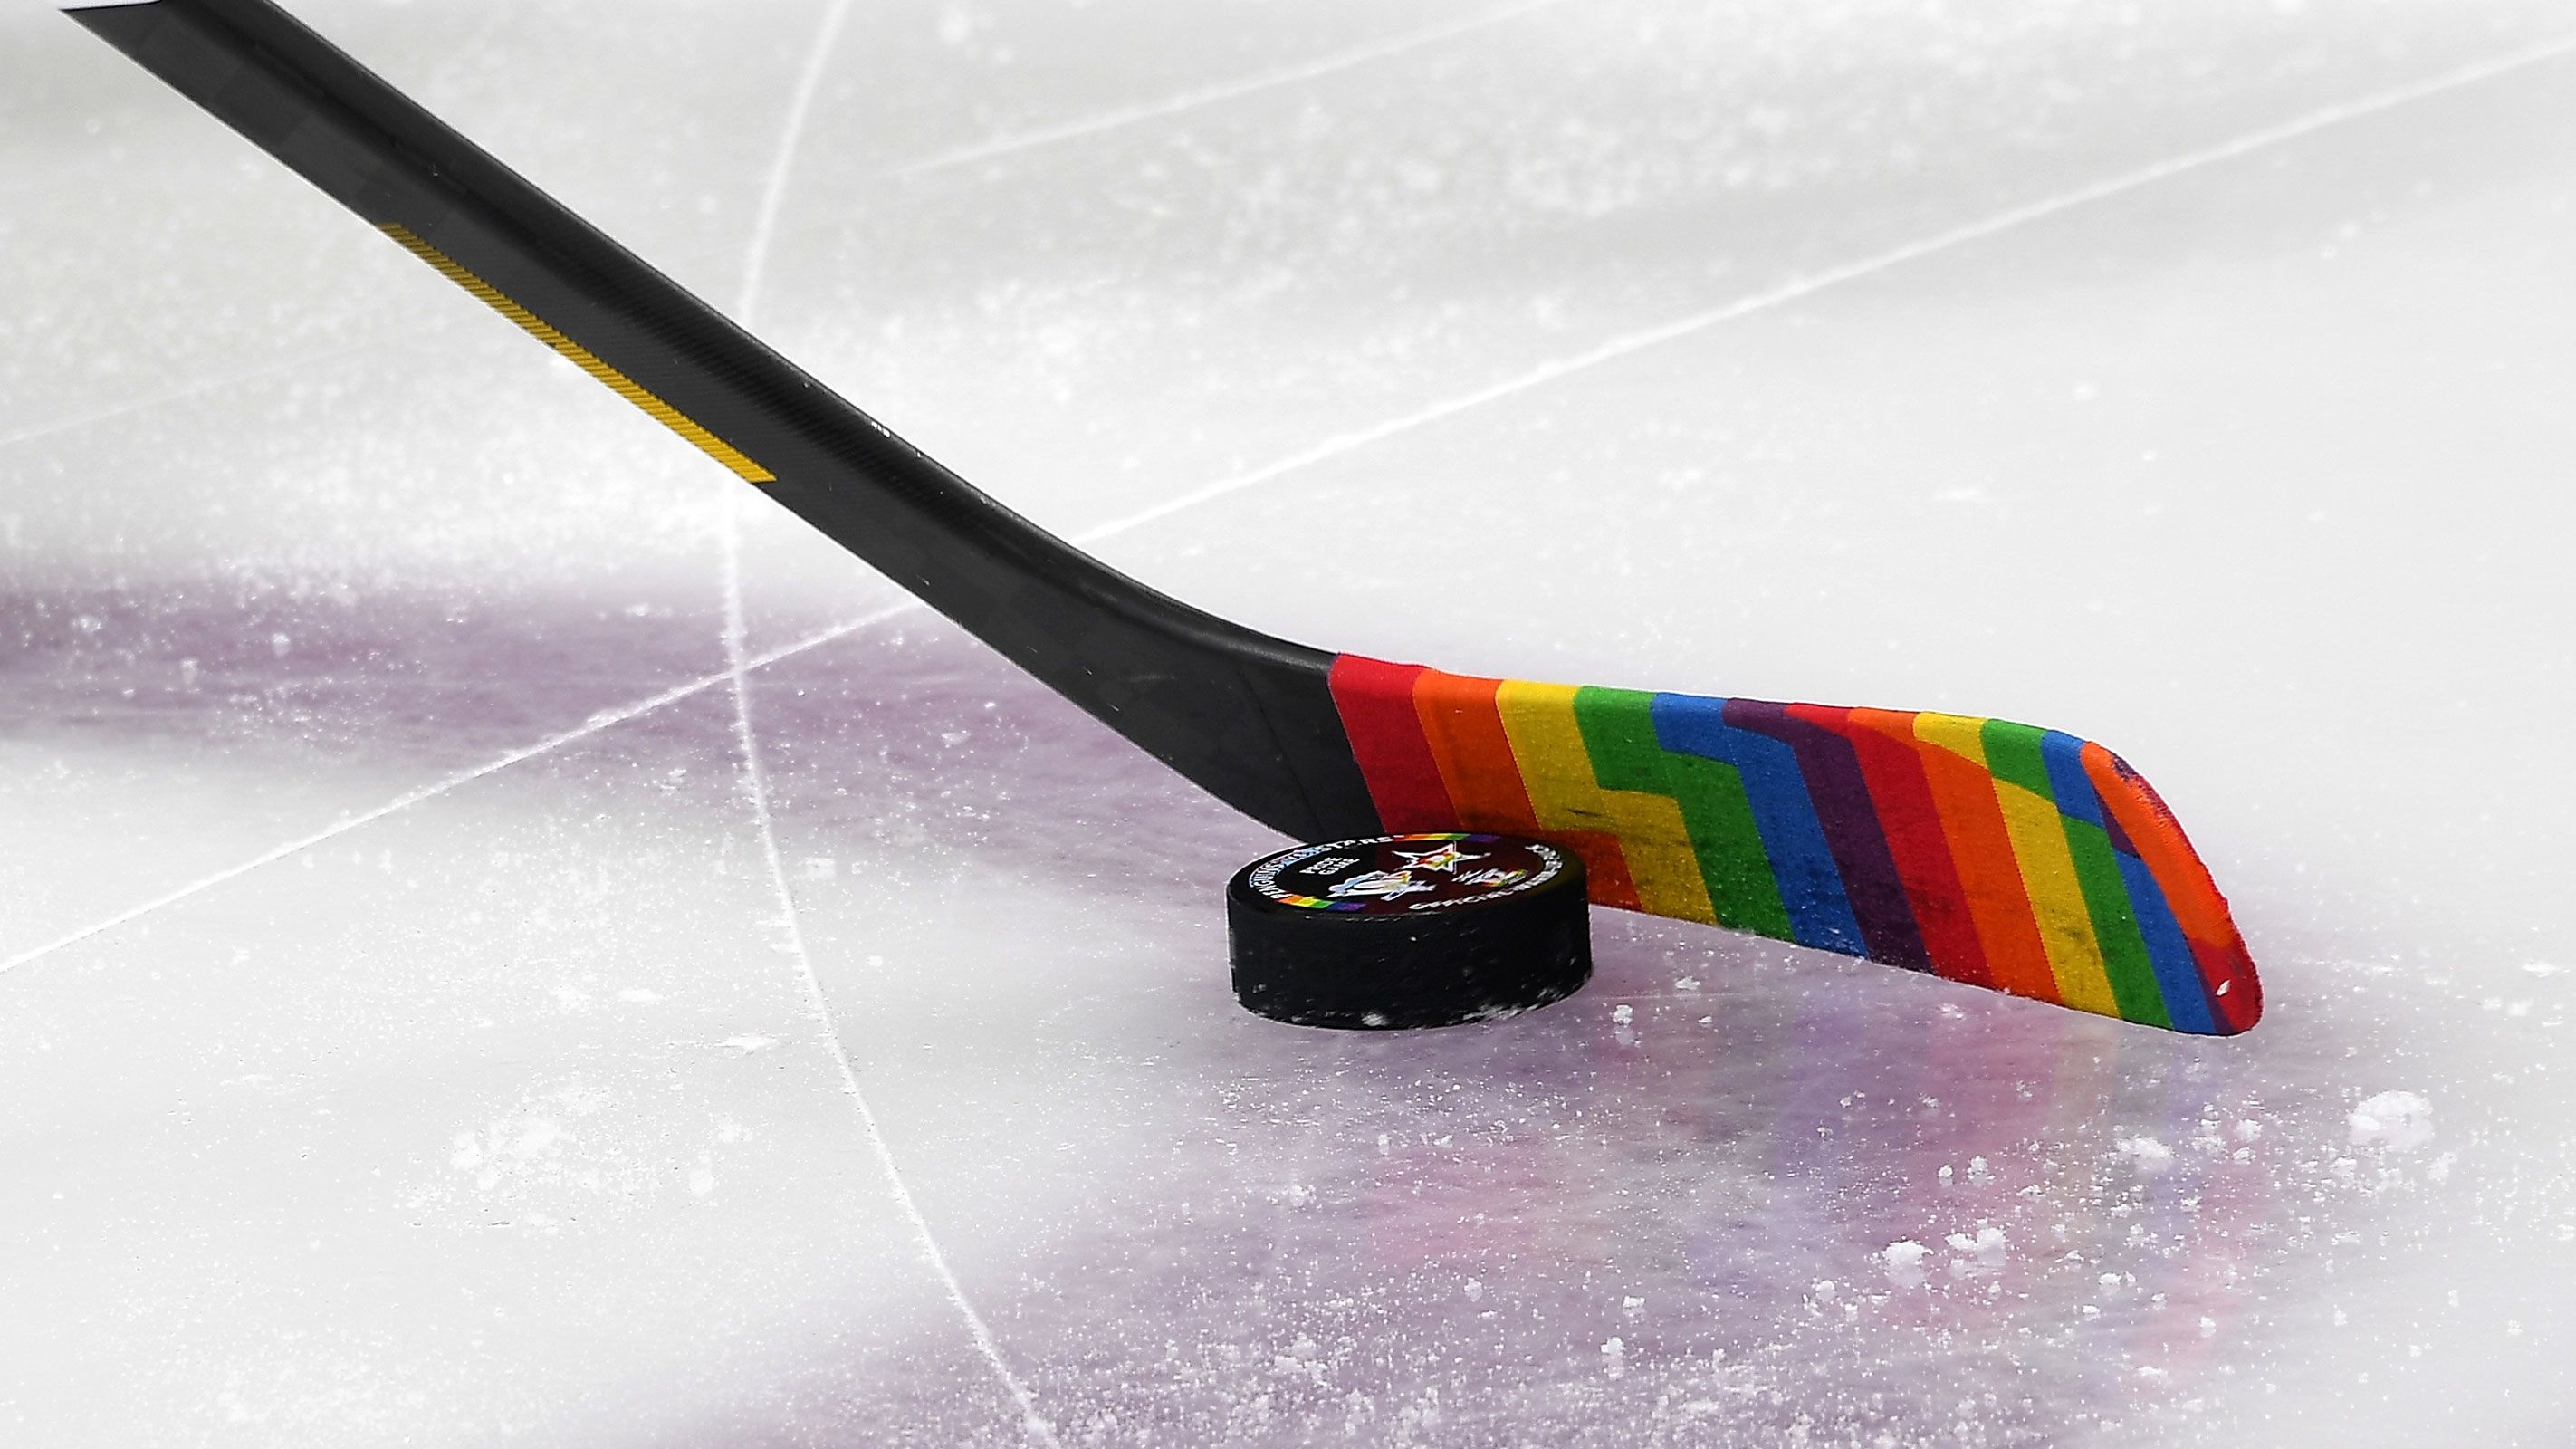 More and more athletes refuse to wear rainbow Pride uniforms